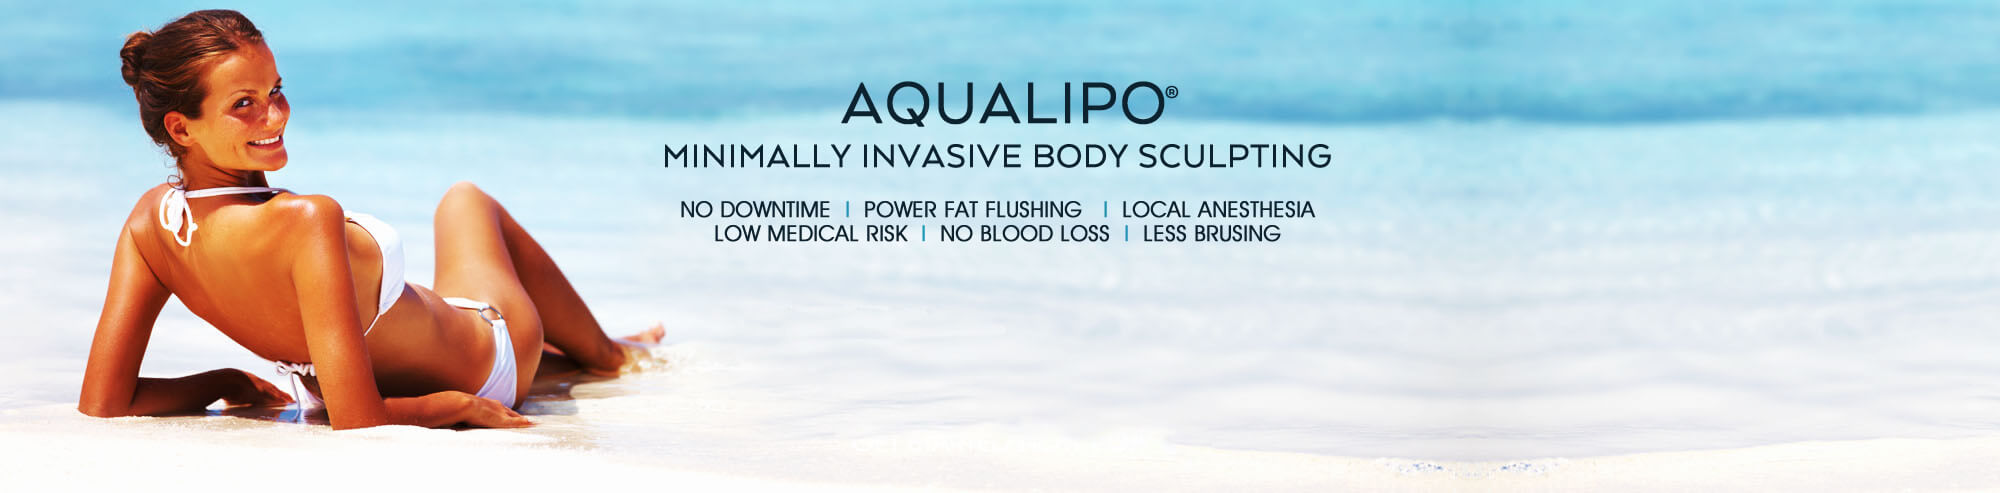 AQUALIPO MINIMALLY  - INVASIVE BODY SCULPTING NO DOWNTIME | POWER FAT FLUSHING | LOCAL ANESTHESIA | LOW MEDICAL RISK | NO BLOOD LOSS | LESS BRUSING